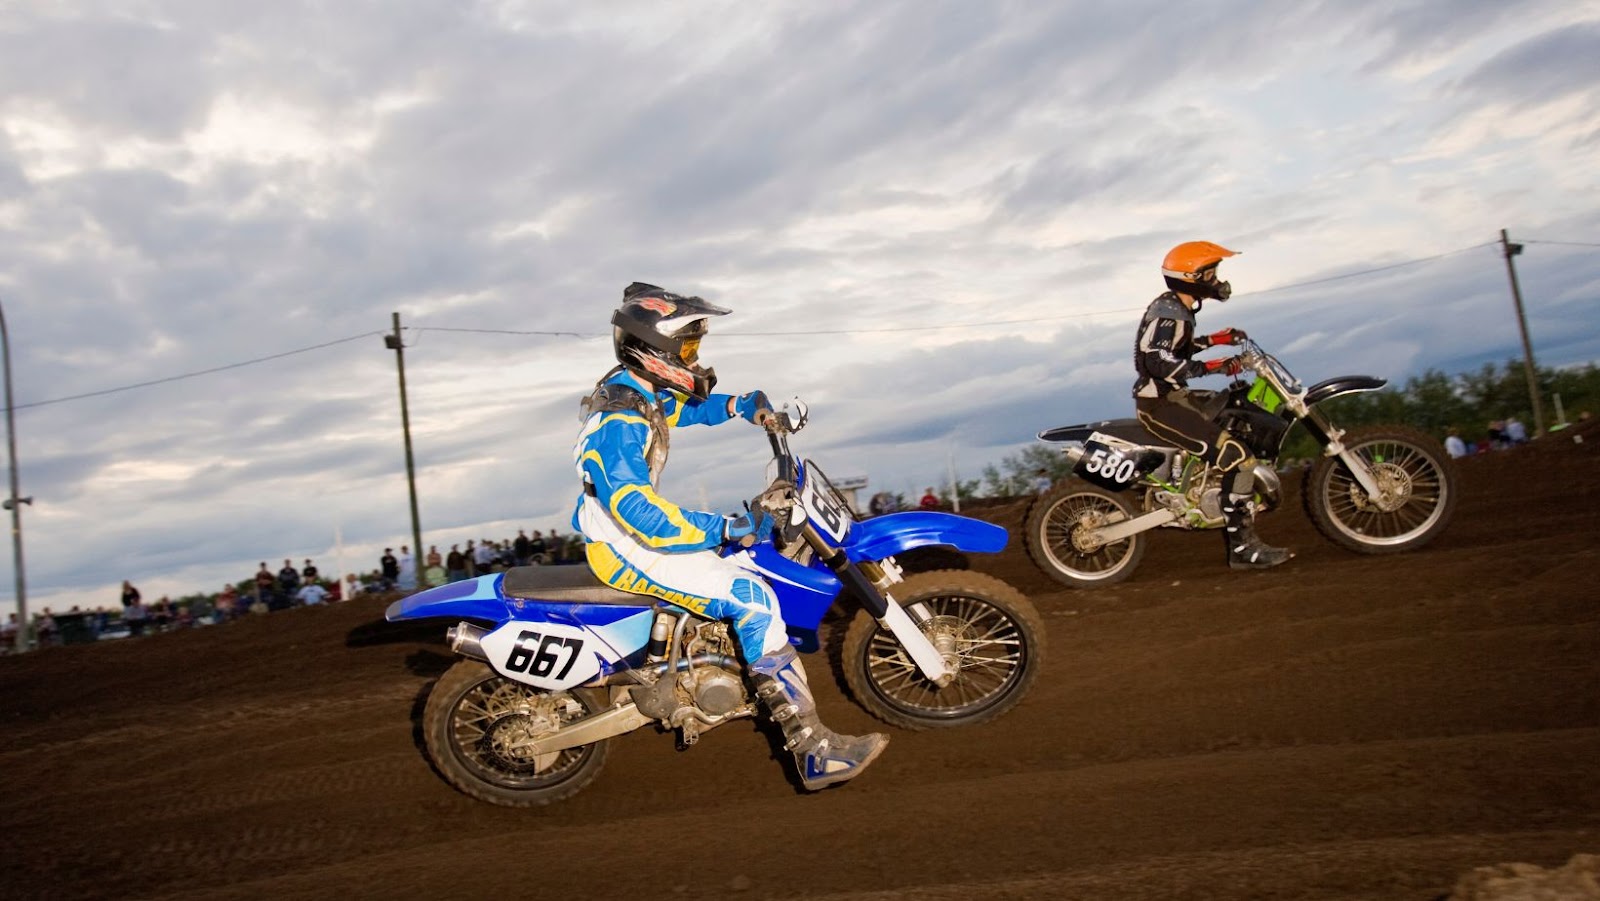 Take Your Ride To A Whole New Level With Buckskin Hills Motor Cross Track Day